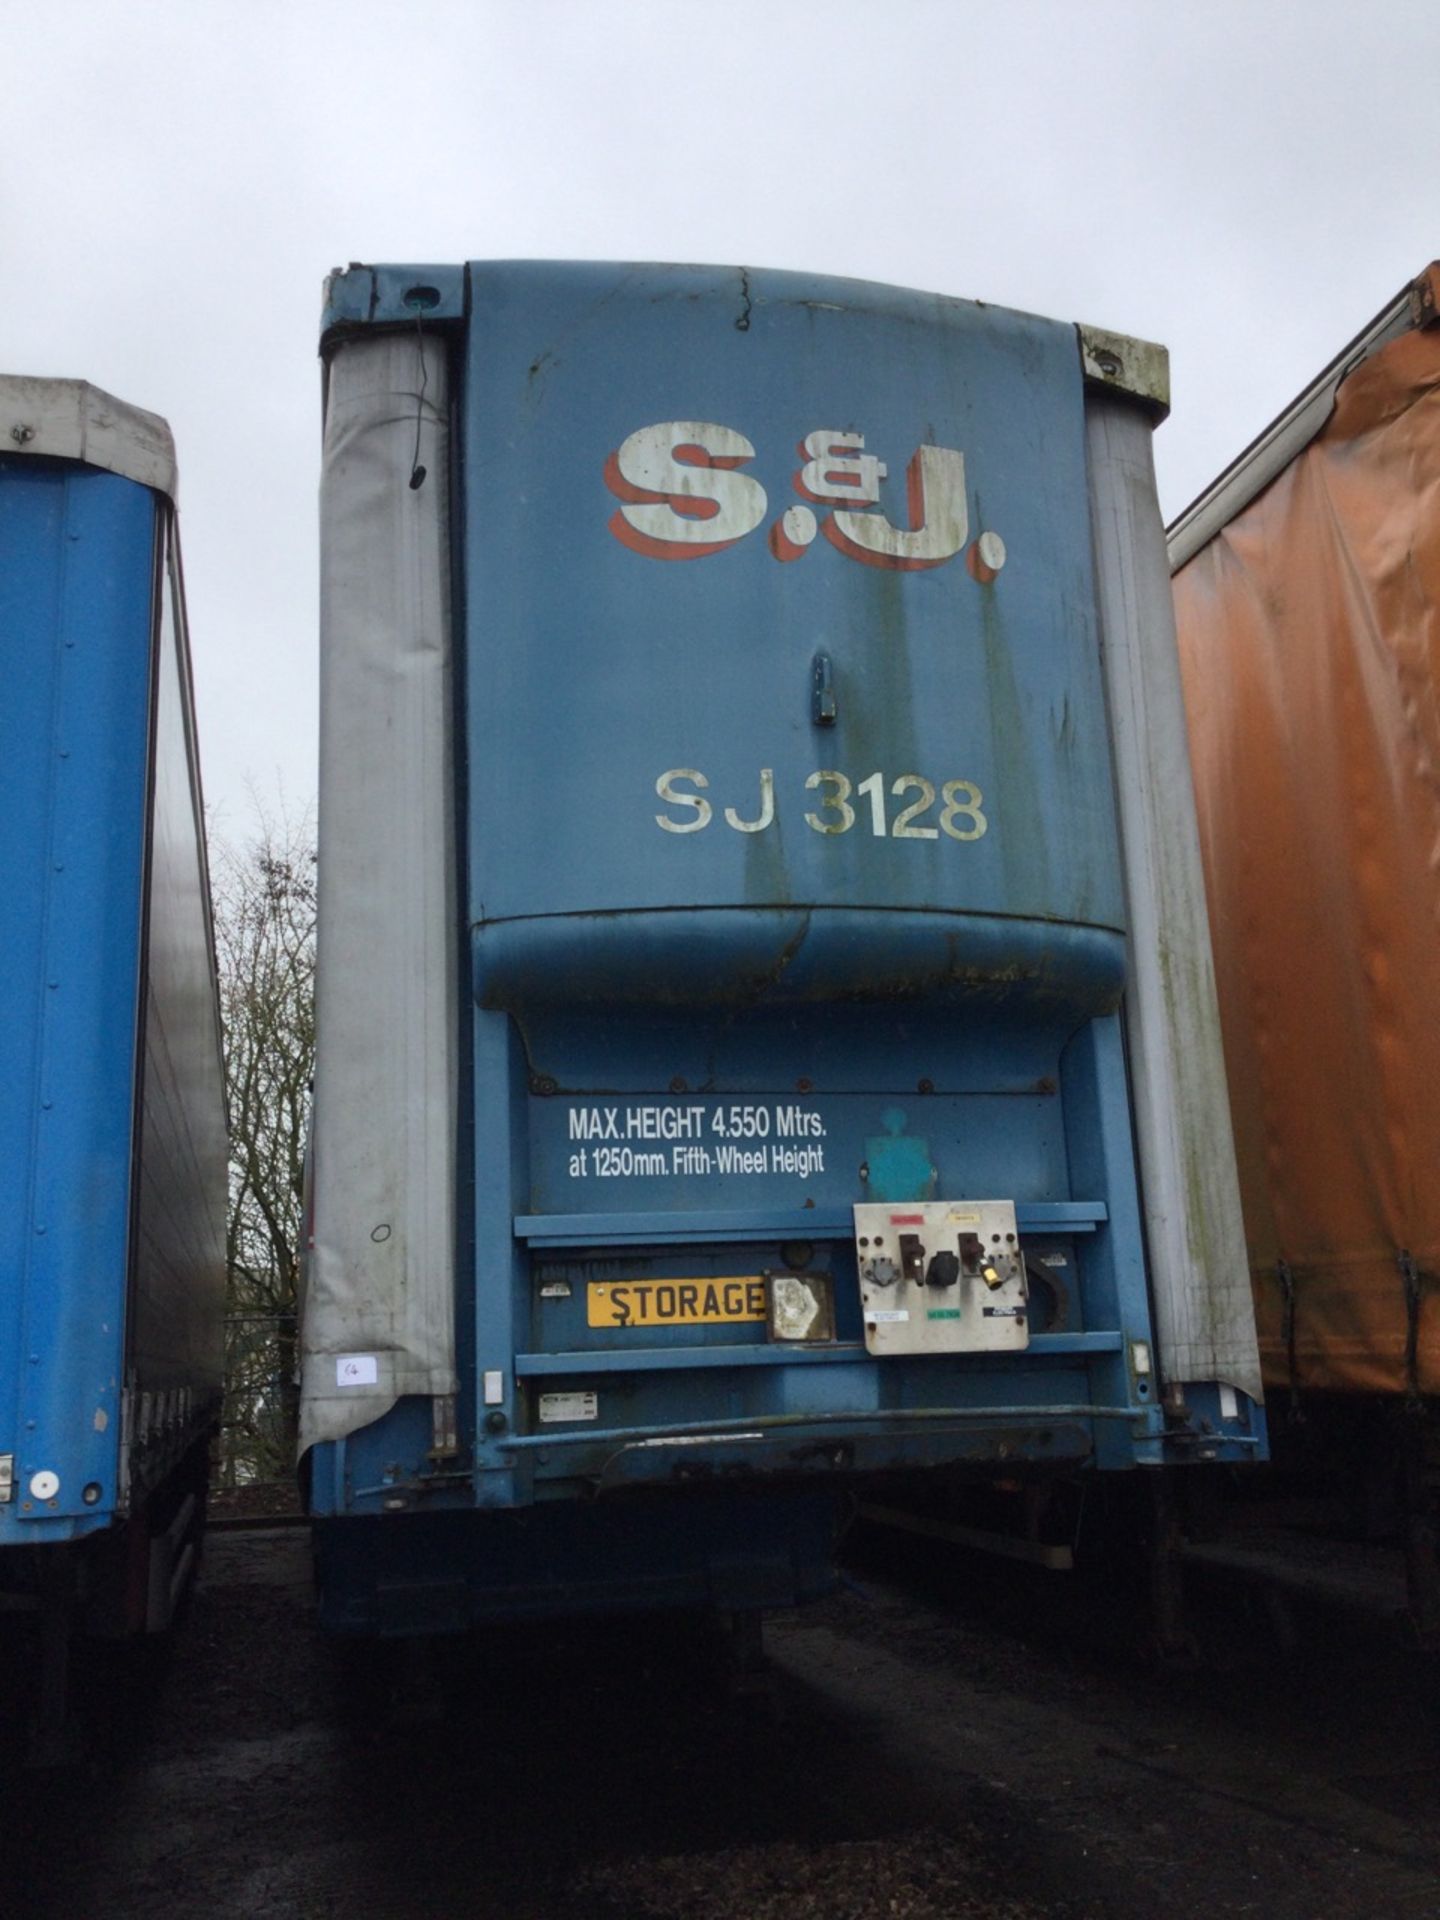 Don Bur Tri-Axle 13.6m Curtainsider Trailer Mot Expired , serial number C096268 , year 2001. Note